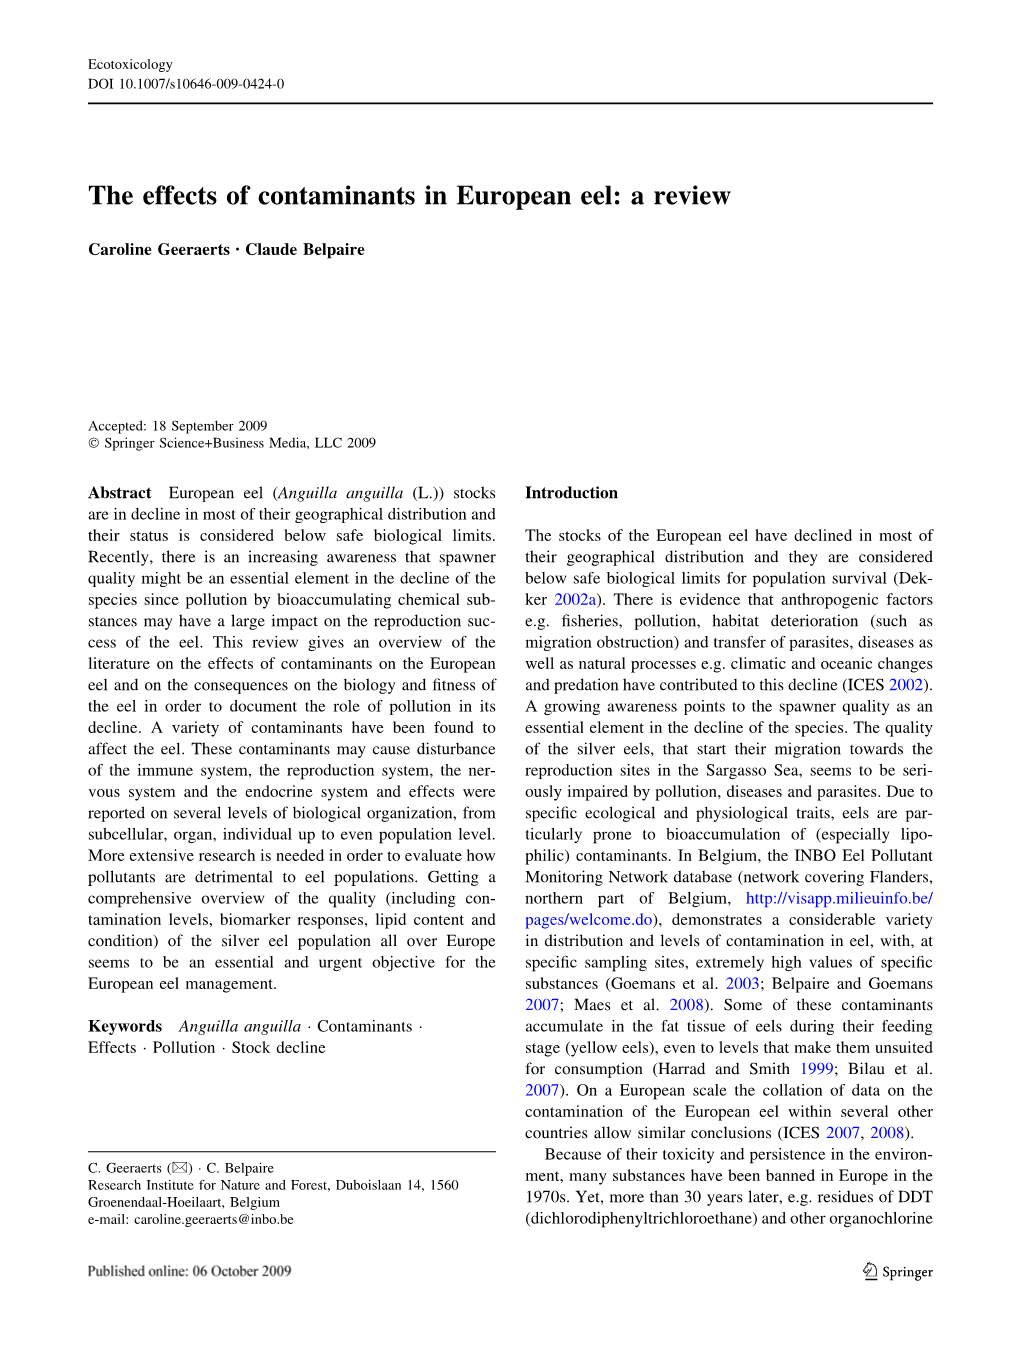 The Effects of Contaminants in European Eel: a Review